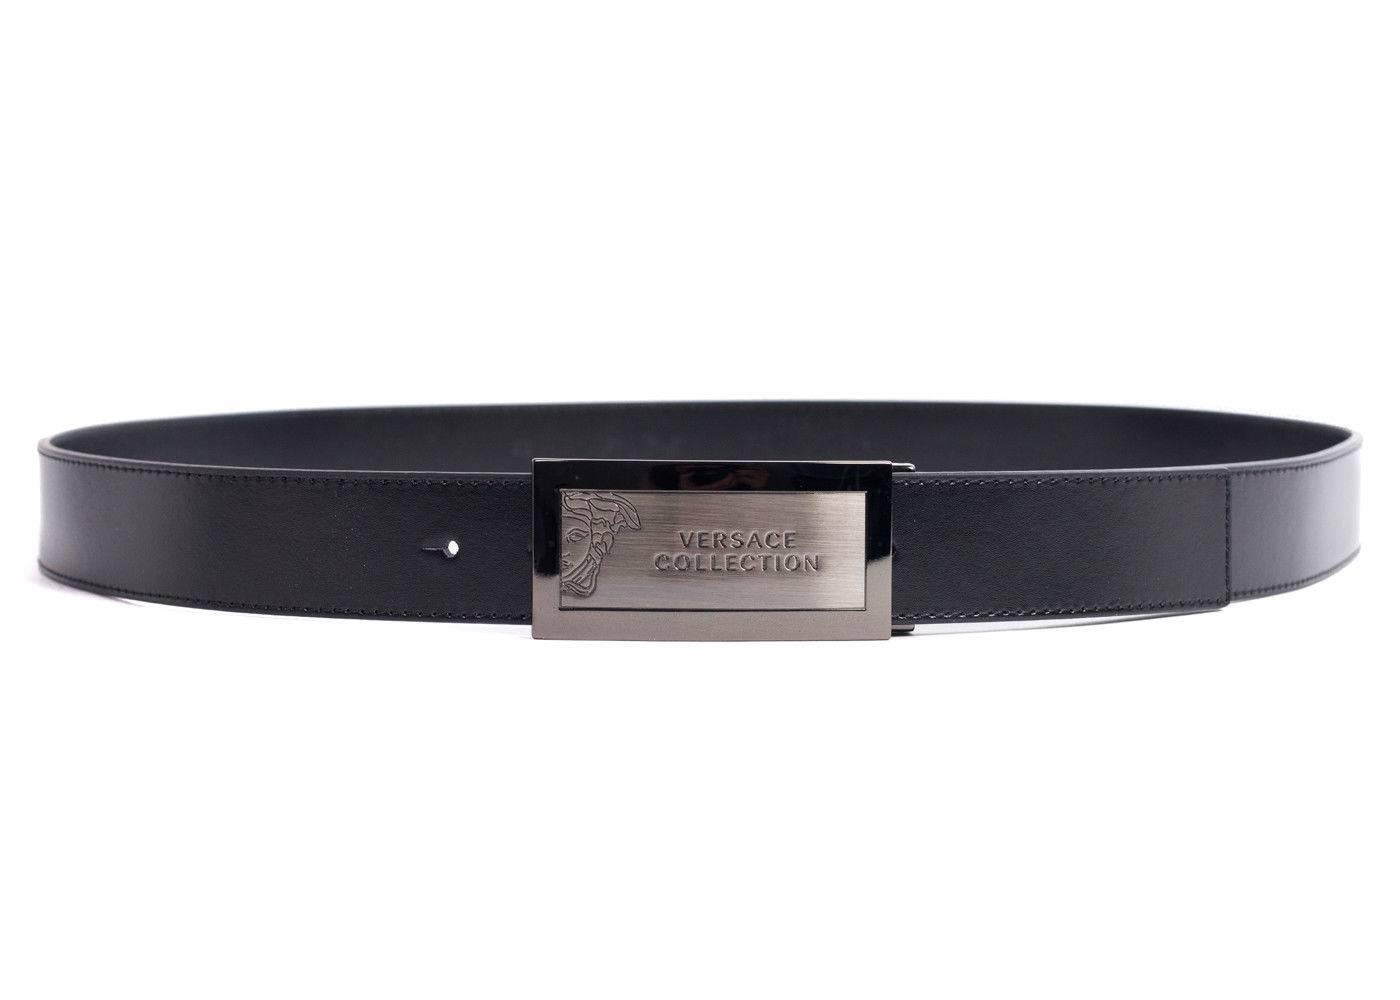 Brand New Versace Collection Belt
Original Tags
Retails in Stores & Online for $450
One Size Fits All


Versace Collection's black leather belt made with 100% calfskin leather featuring a silver plated logo with a medusa head. Perfect to pair with